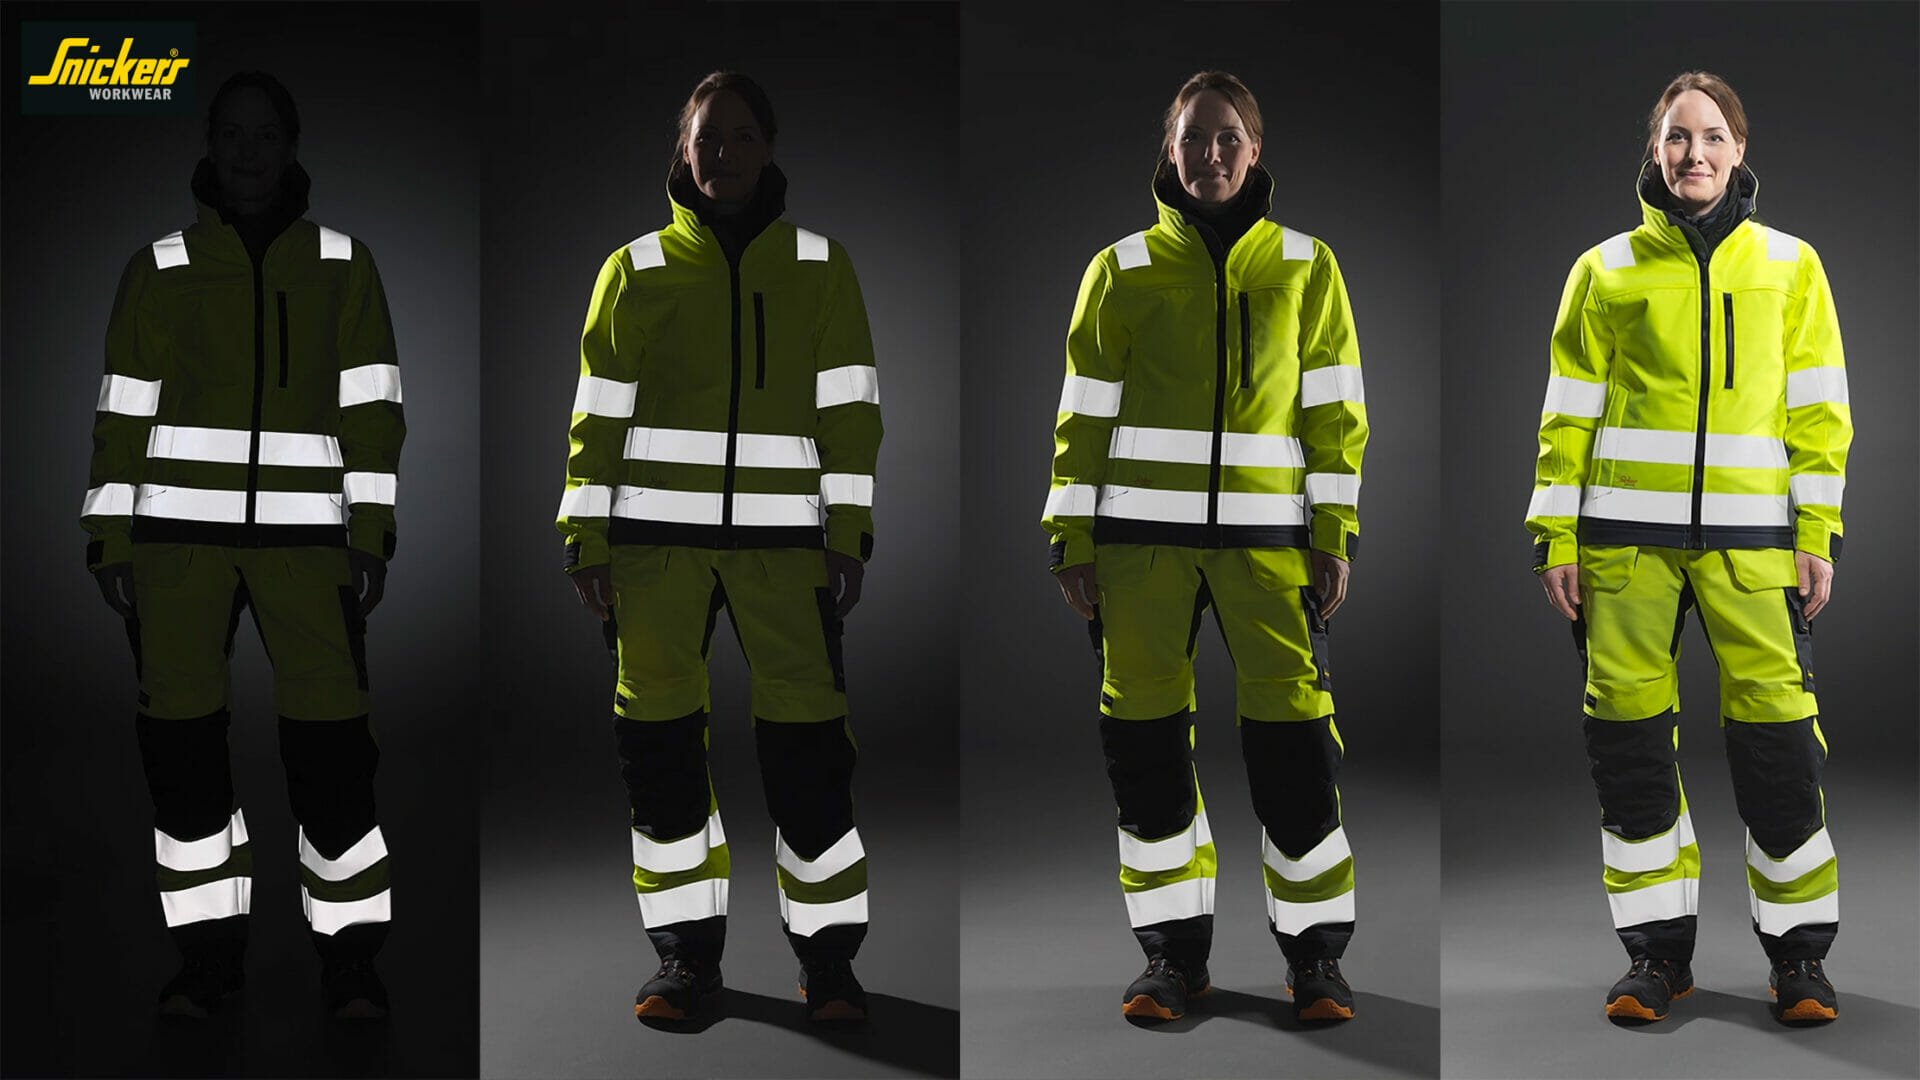 Be Certain on Safety with Certified Protective Wear from Snickers Workwear @SnickersWw_UK